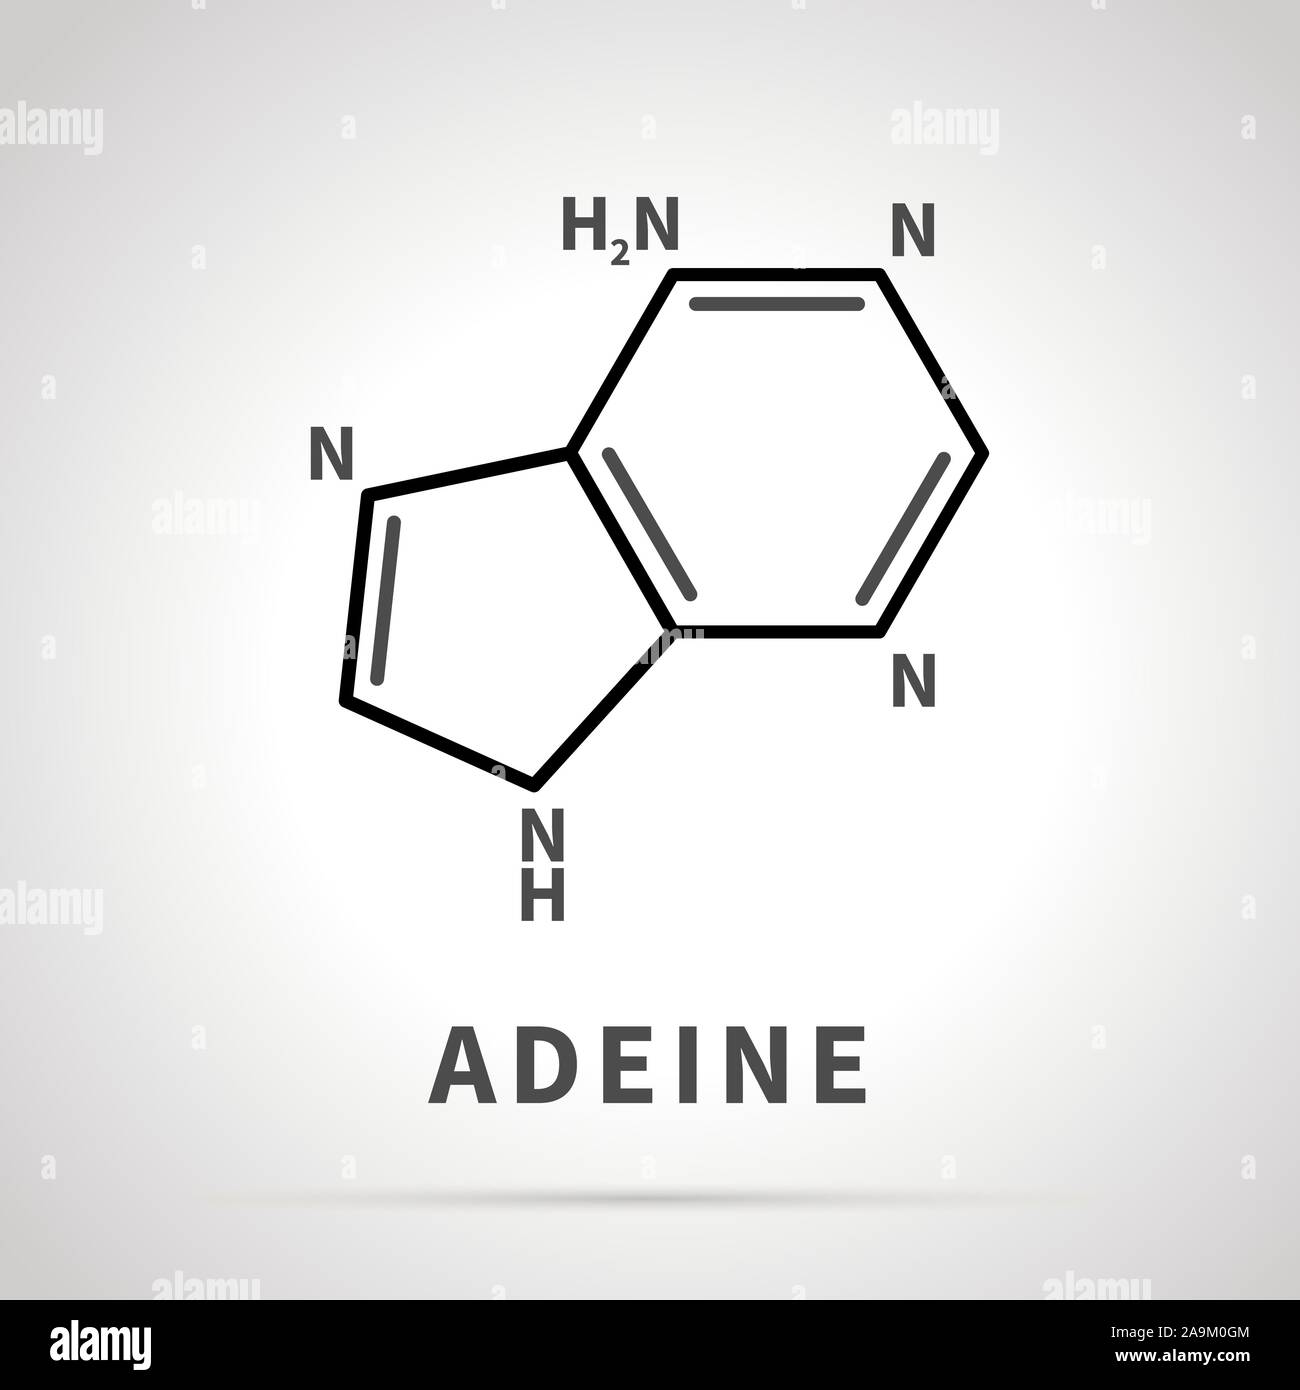 Chemical structure of Adeine, one of the four main nucleobases, simple icon Stock Vector